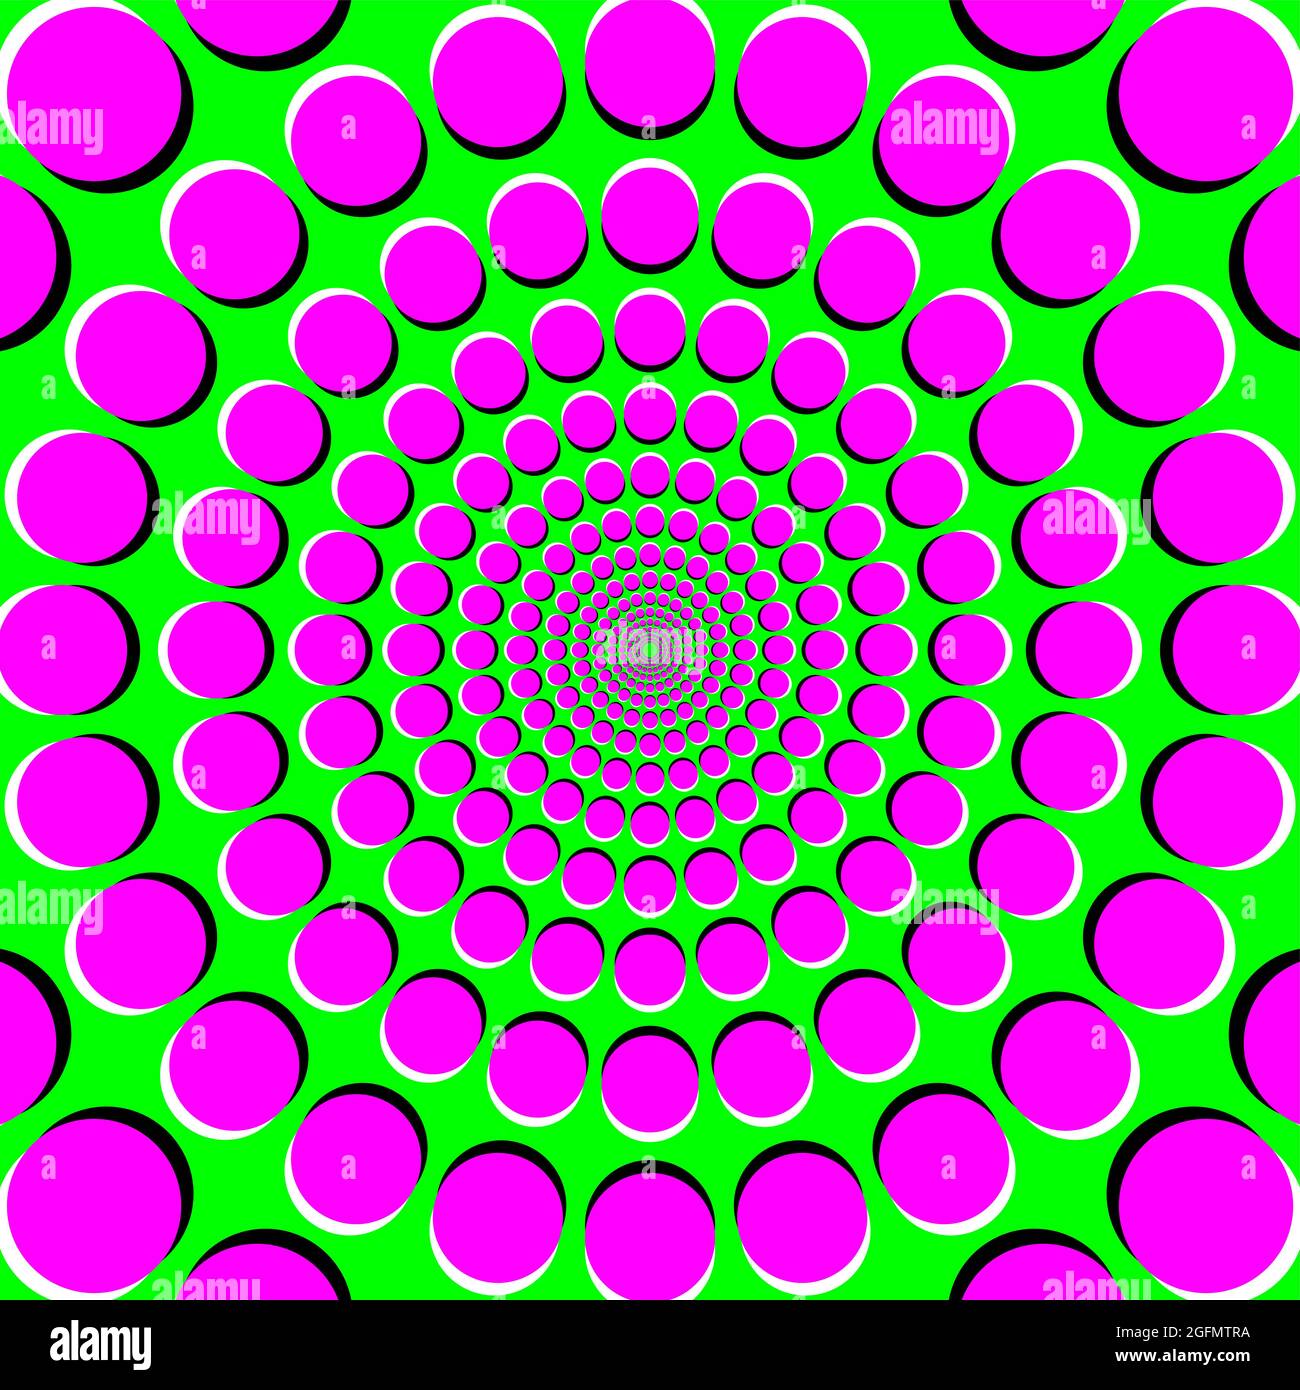 Peripheral drift illusion, PDI, a motion illusion on green background. It seems, the colorful magenta dots become bigger or drift outside. Stock Photo